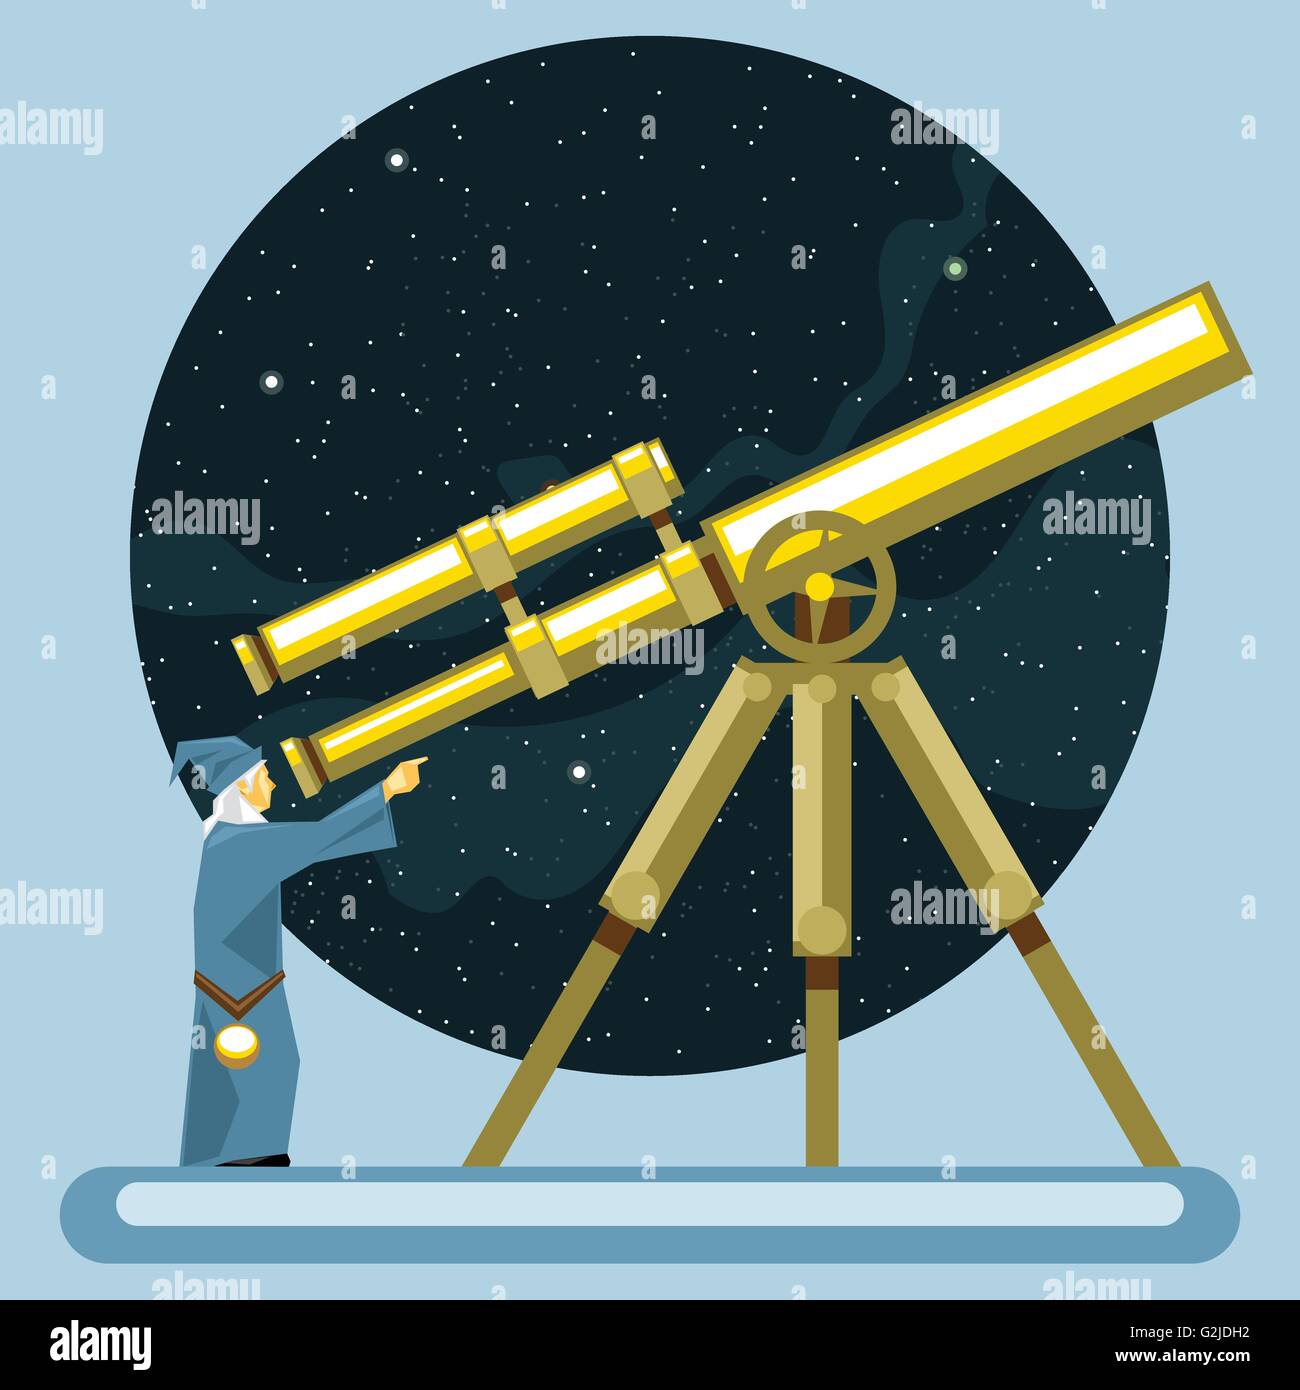 Ancient mag looking into a telescope and pointing with hand, observing stars, planets and galaxies. Digital vector image. Stock Vector